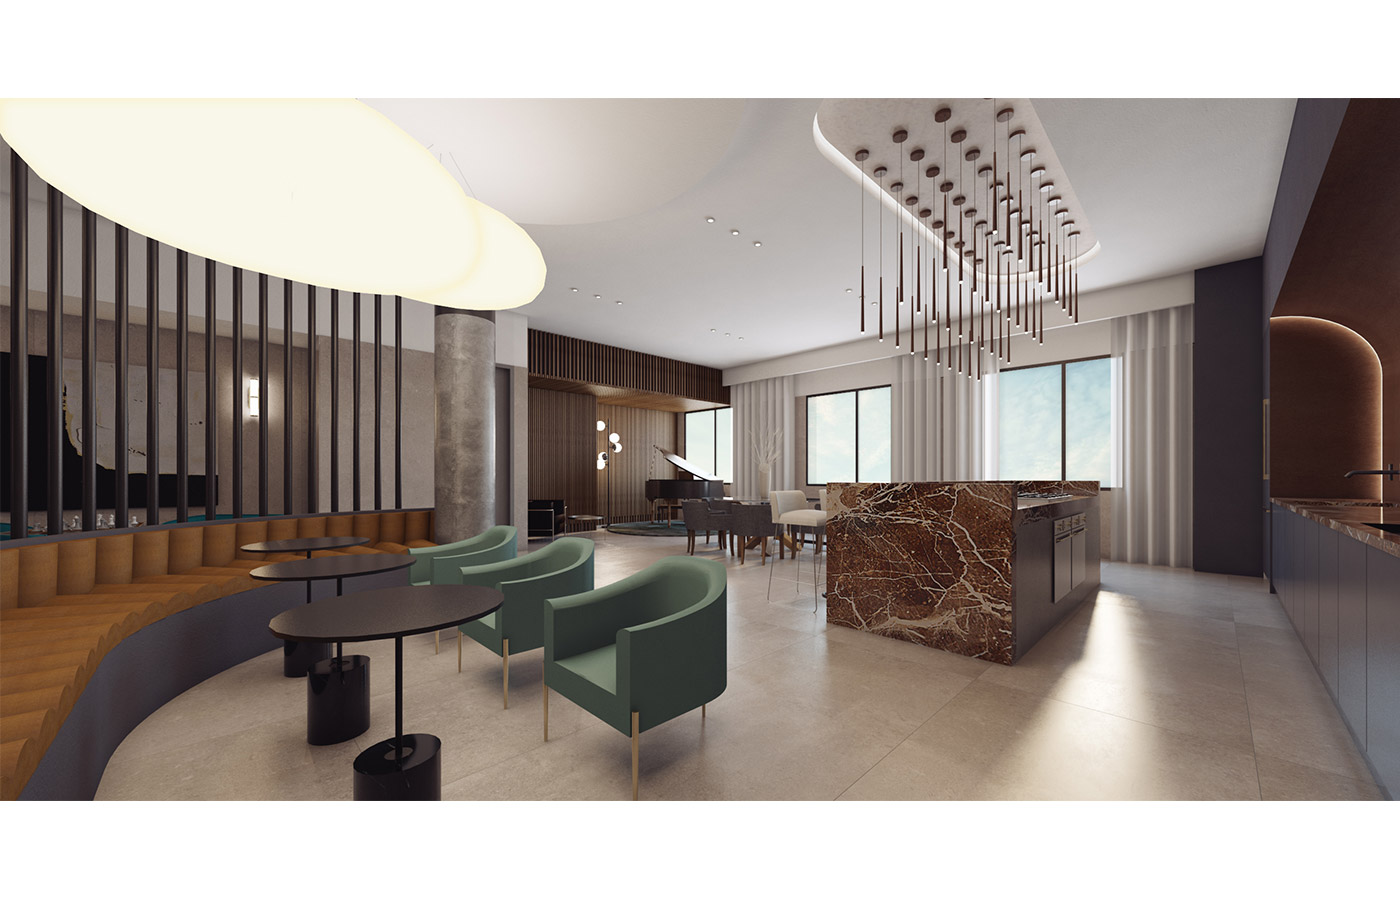 Rendering of resident lounge at 260 Gold Street - StudiosC Architecture